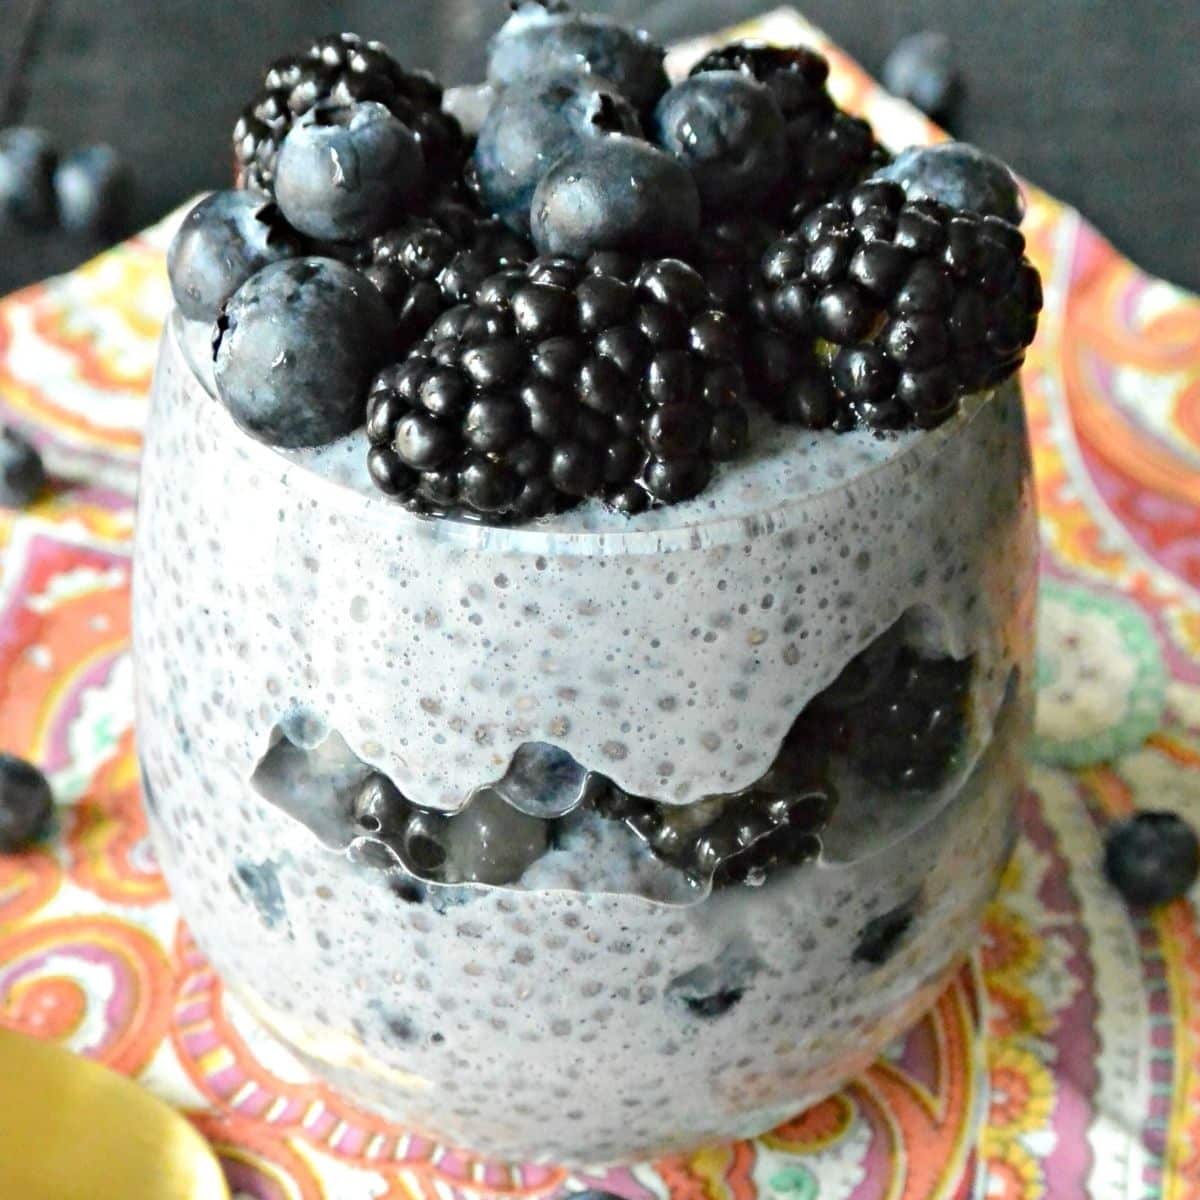 Blueberry and blackberry chia pudding in a glass topped with fresh berries